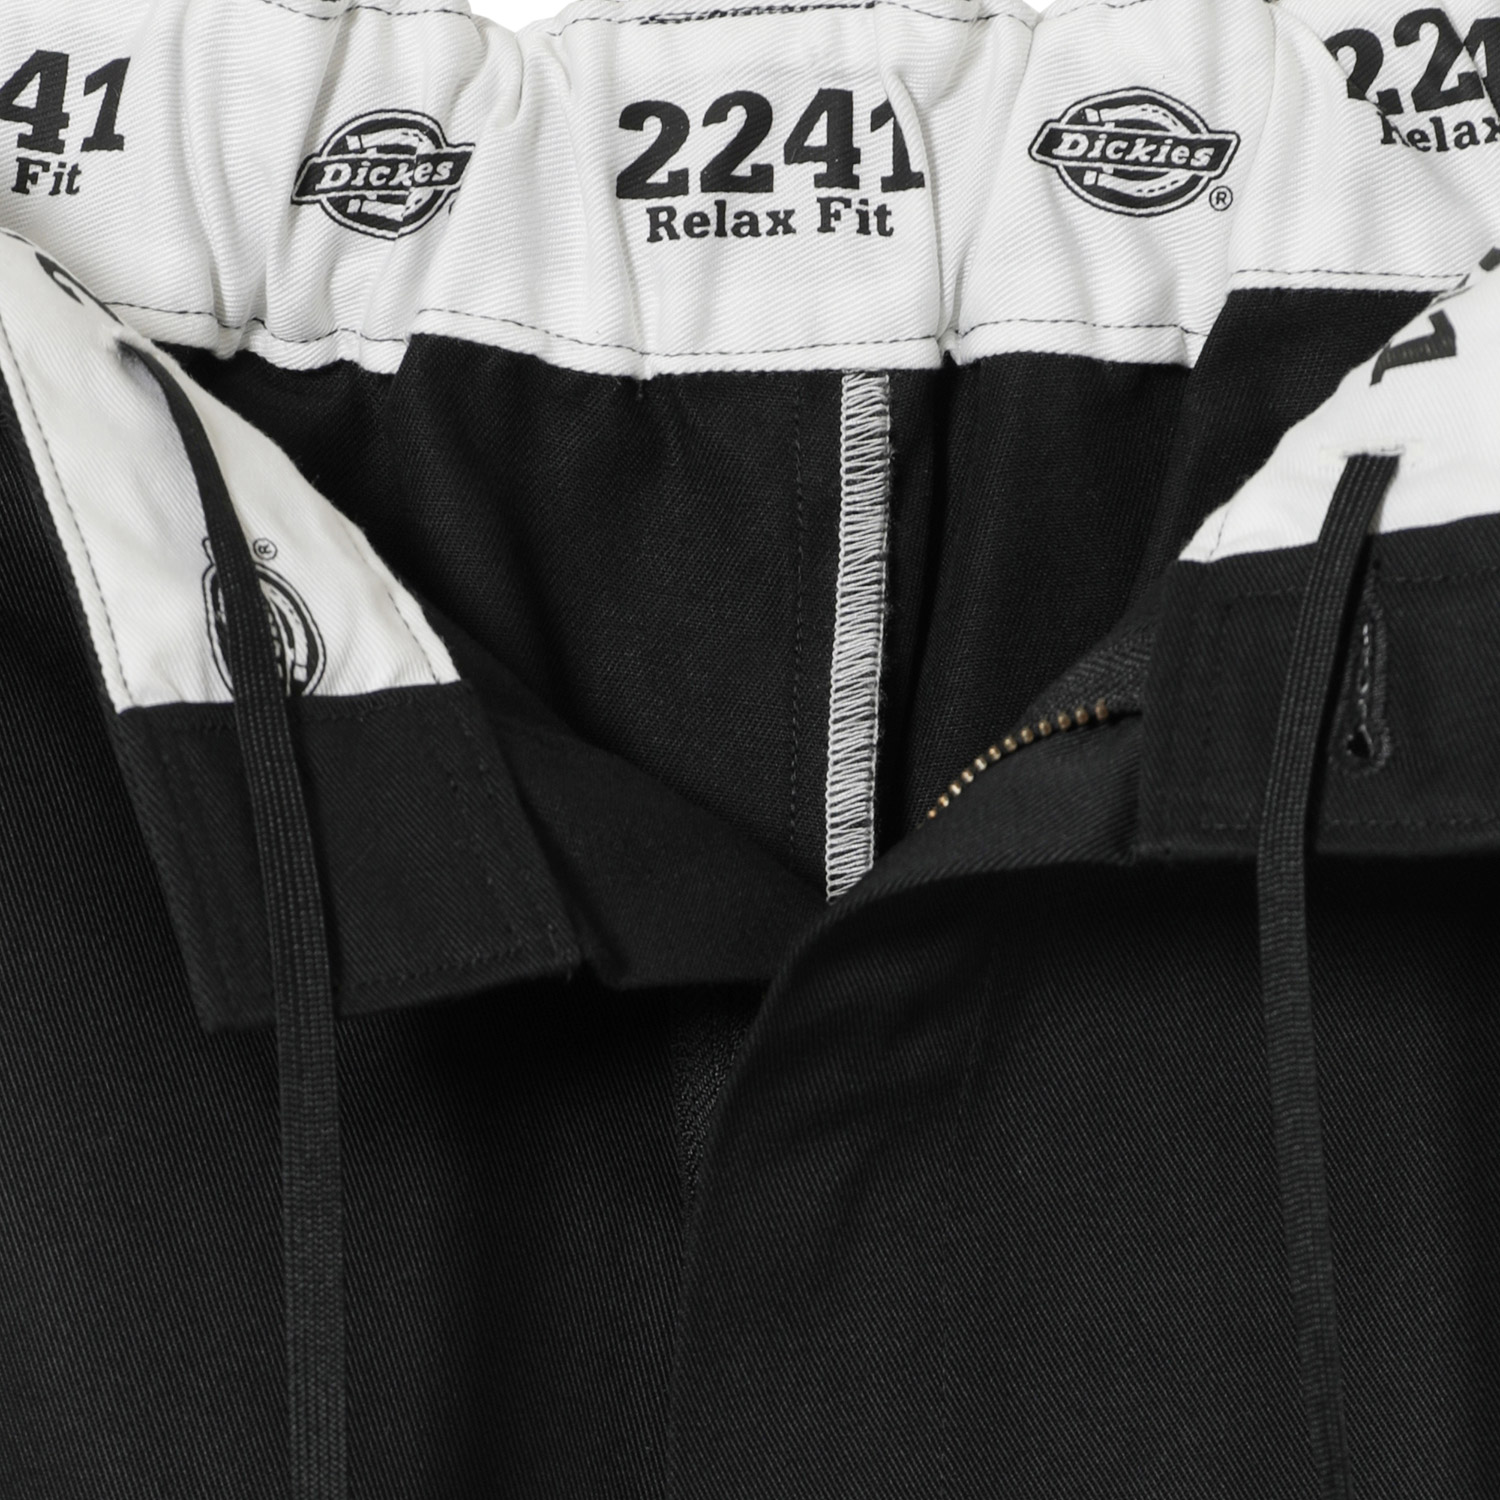 Dickies x N.HOOLYWOOD COMPILE ペインターパンツ "2241" image number 2